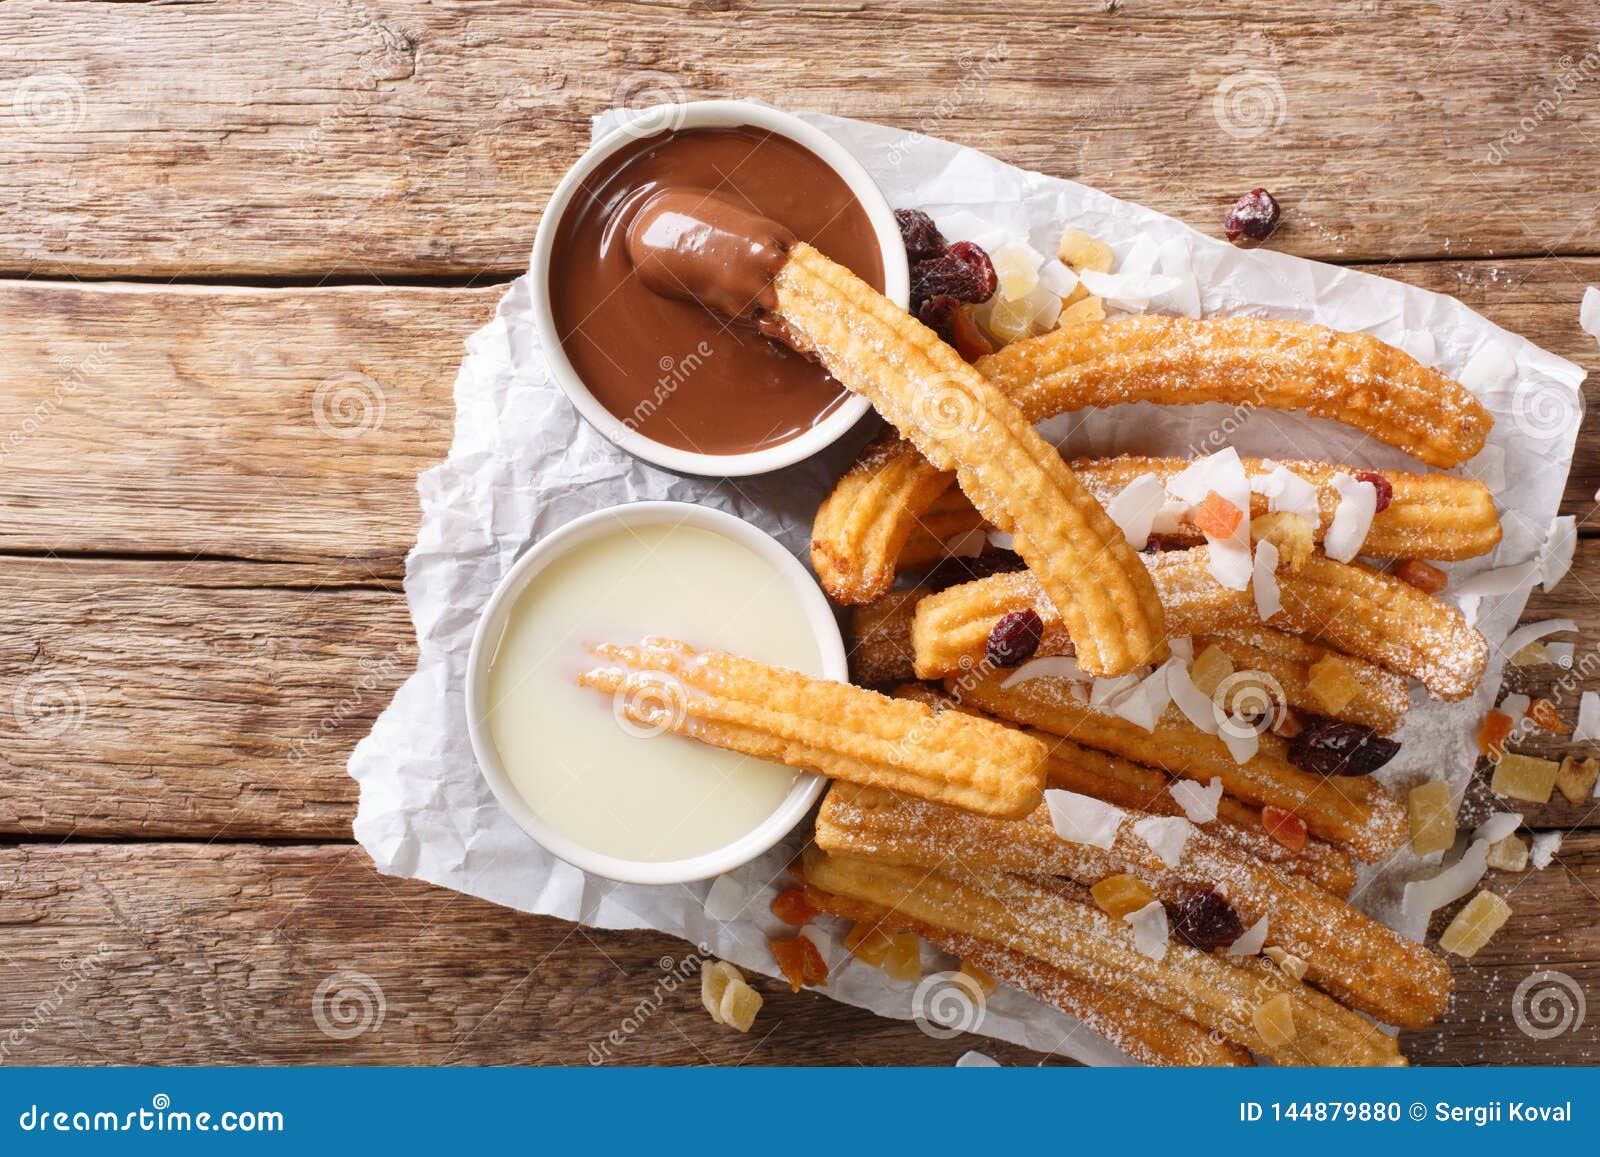 https://thumbs.dreamstime.com/z/freshly-made-hot-churros-chocolate-condensed-milk-close-up-horizontal-top-view-table-above-144879880.jpg